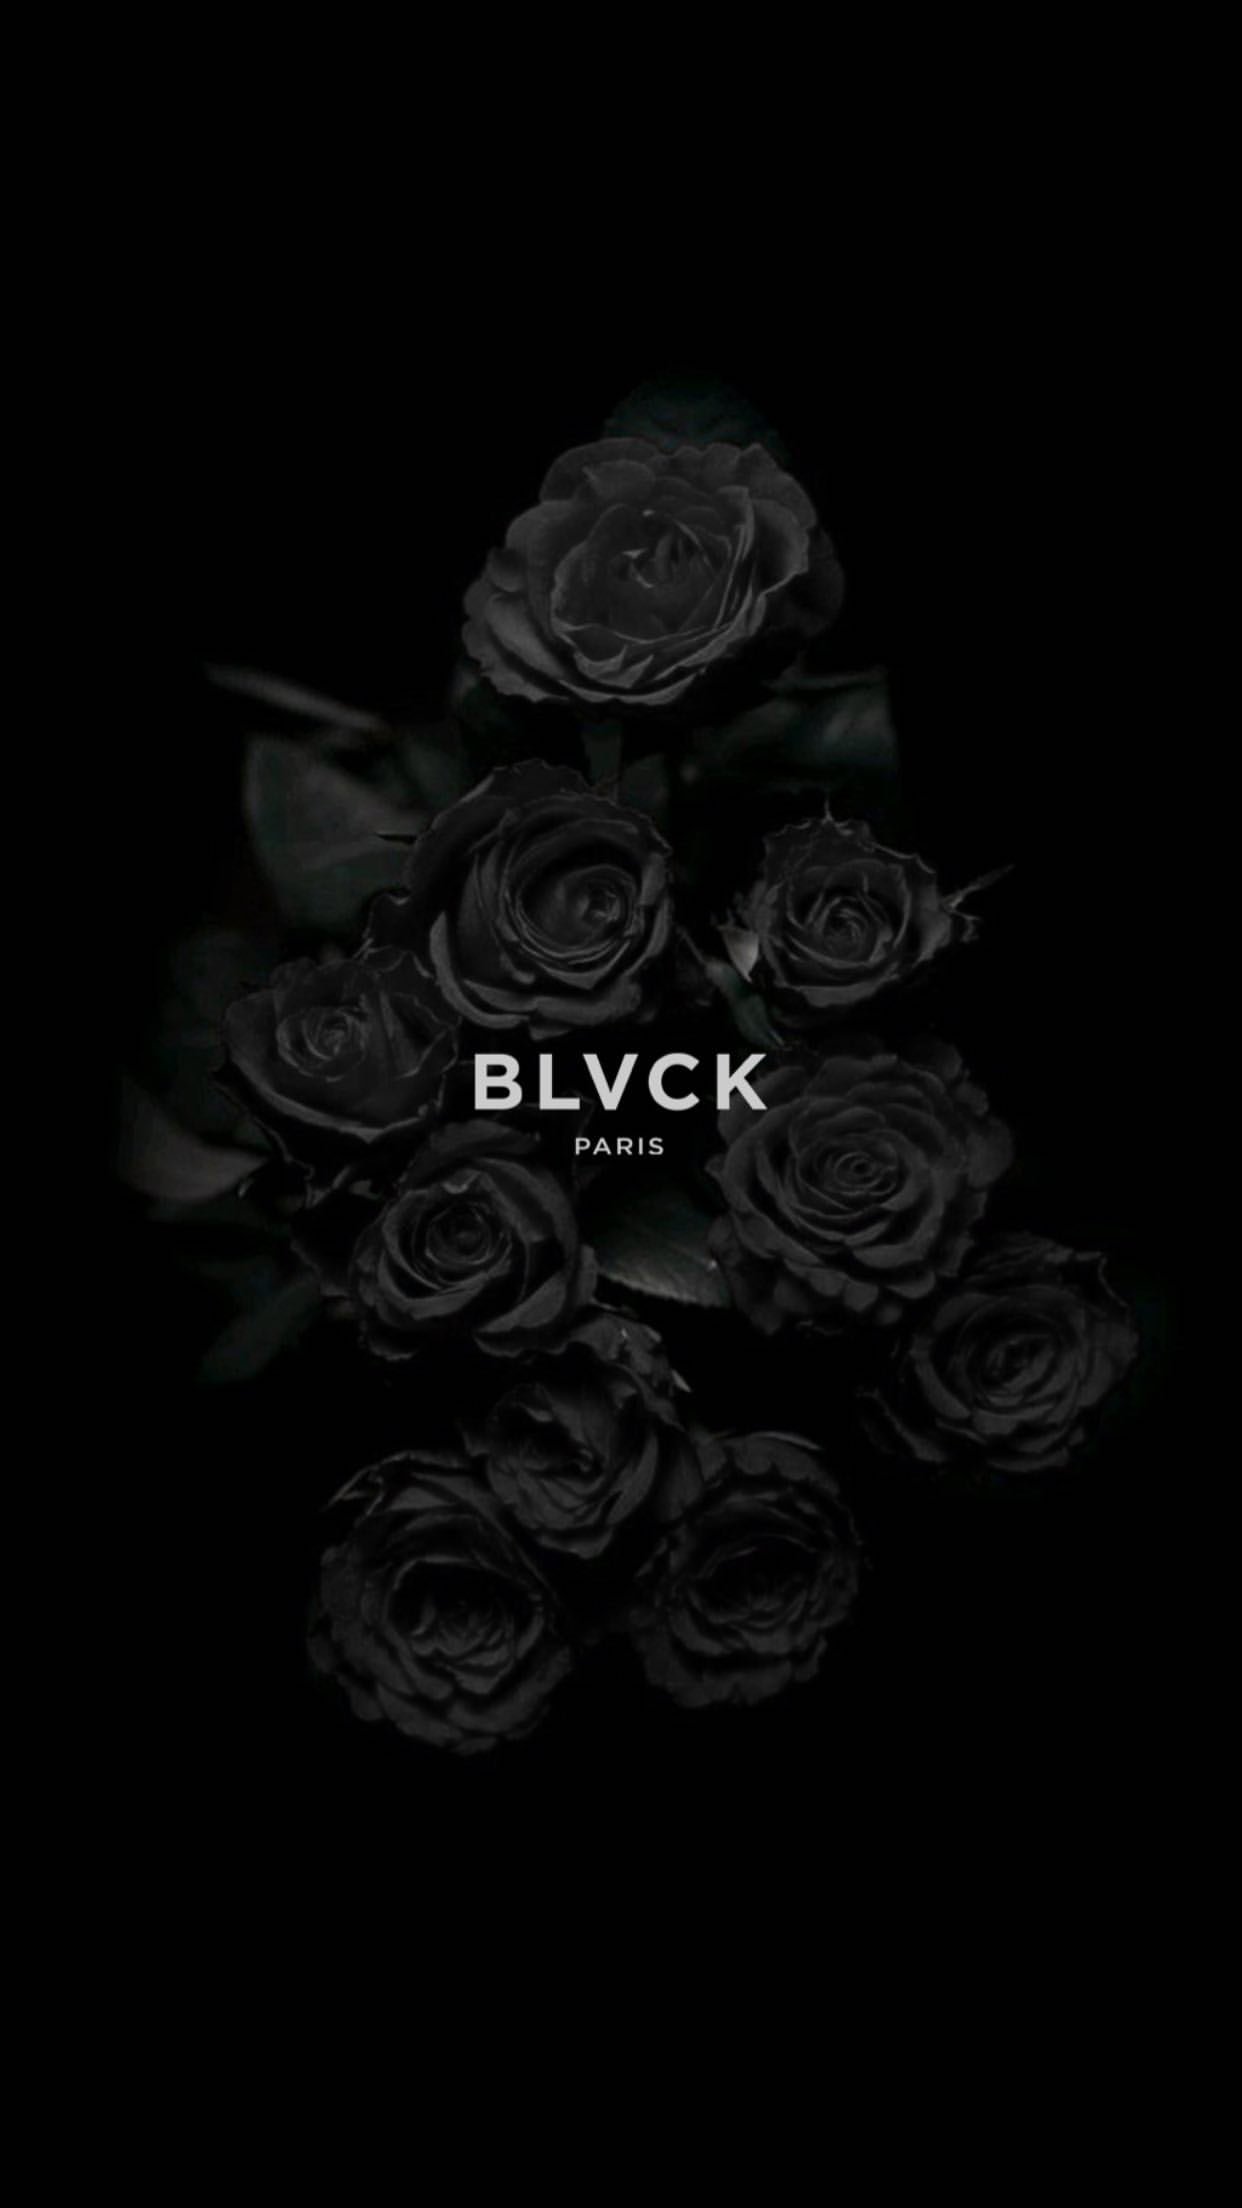 Blvck Paris Whte Paris 30日間毎日 企画 27日目 スマホの待ち受けを毎日変えて楽しもう ロゴ By Blvck Paris 待受画像 薔薇 壁紙 ブラックパリ Blvckjapan T Co 3ulfnf8gso Twitter